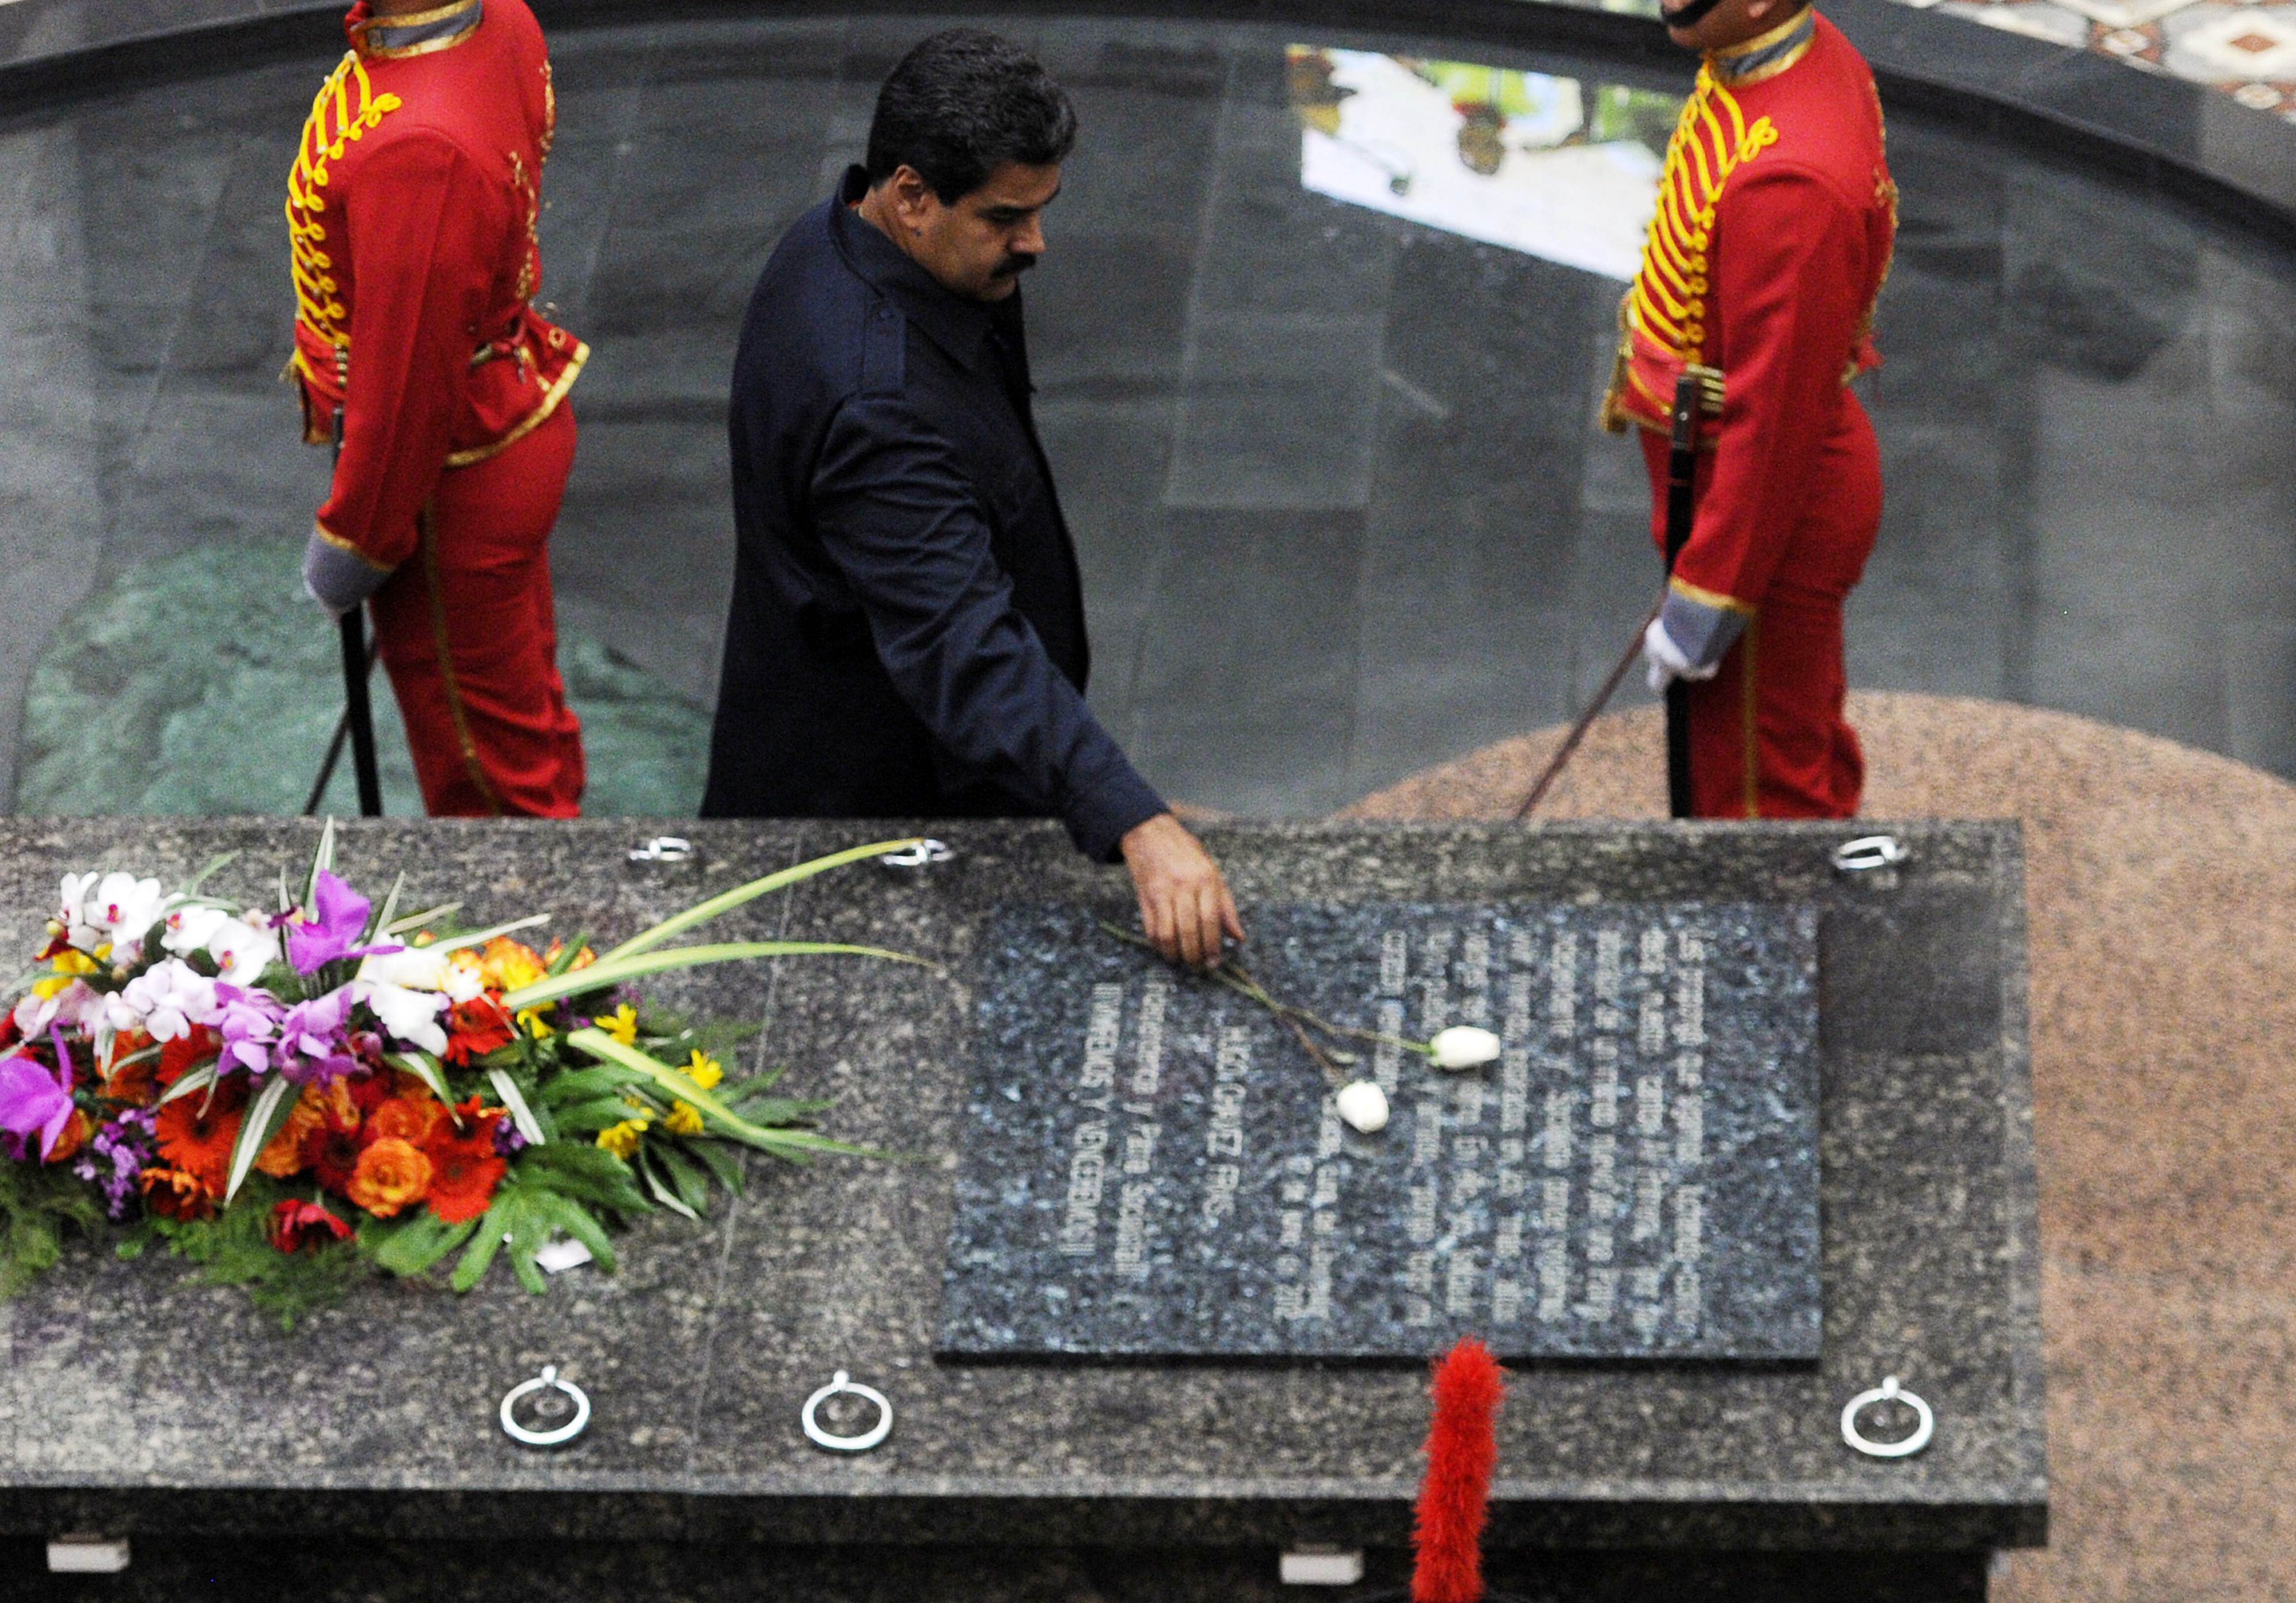 Chavez Grave - TOPSHOTS  Venezuelan President Nicolas Maduro places a rose atop the tomb of the late President Hugo Chavez during a ceremony within commemorations for his' death first anniversary, at the Cuartel de la Montana in Caracas on March 5, 2014. Venezuela marked the anniversary of Chavez's death with a blend of solemn ceremonies, clashes and a break in relations with Panama over protests dogging his successor's presidency.   AFP PHOTO/Leo RAMIREZ